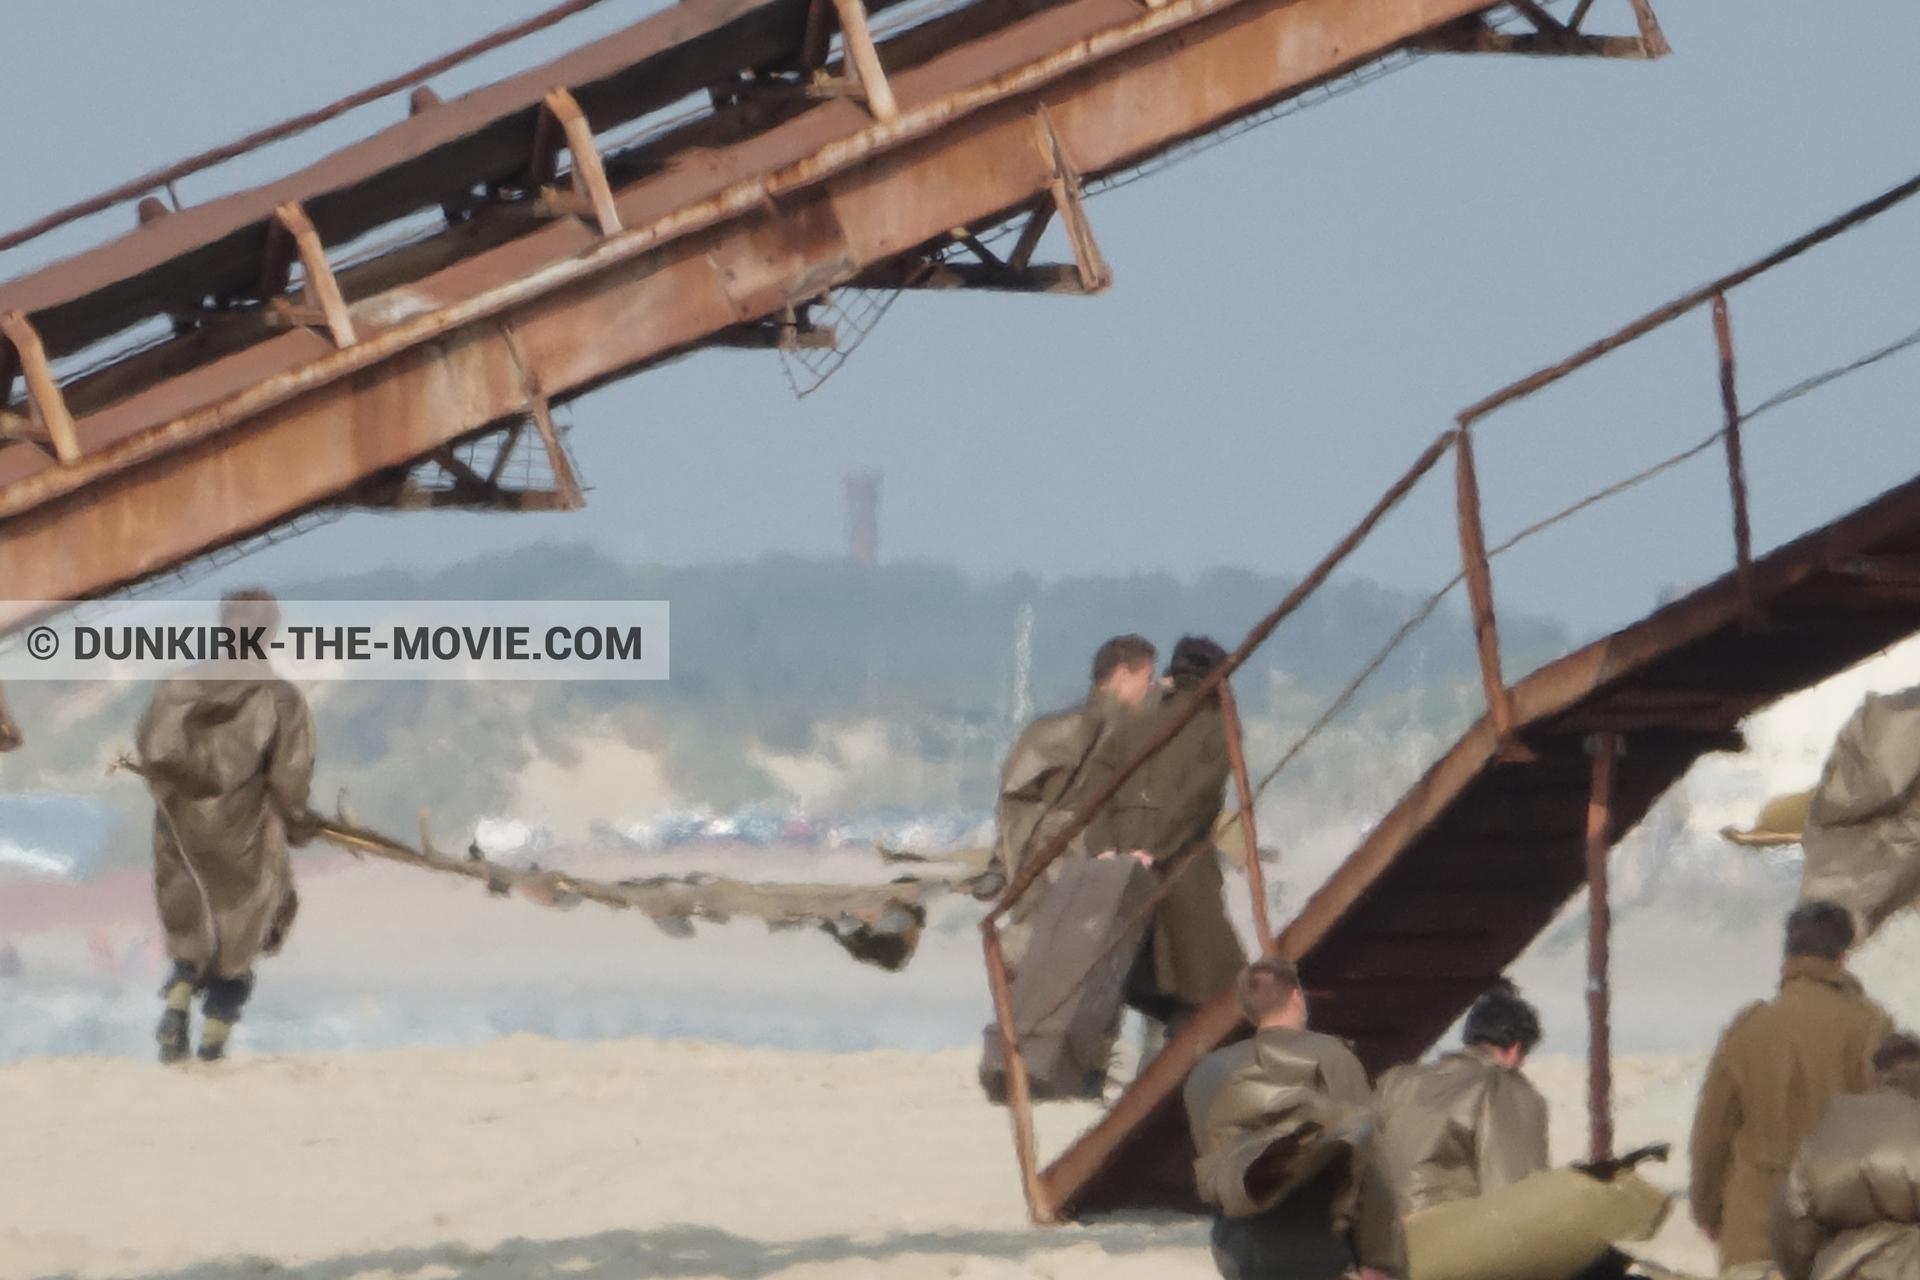 Picture with decor, supernumeraries, beach,  from behind the scene of the Dunkirk movie by Nolan